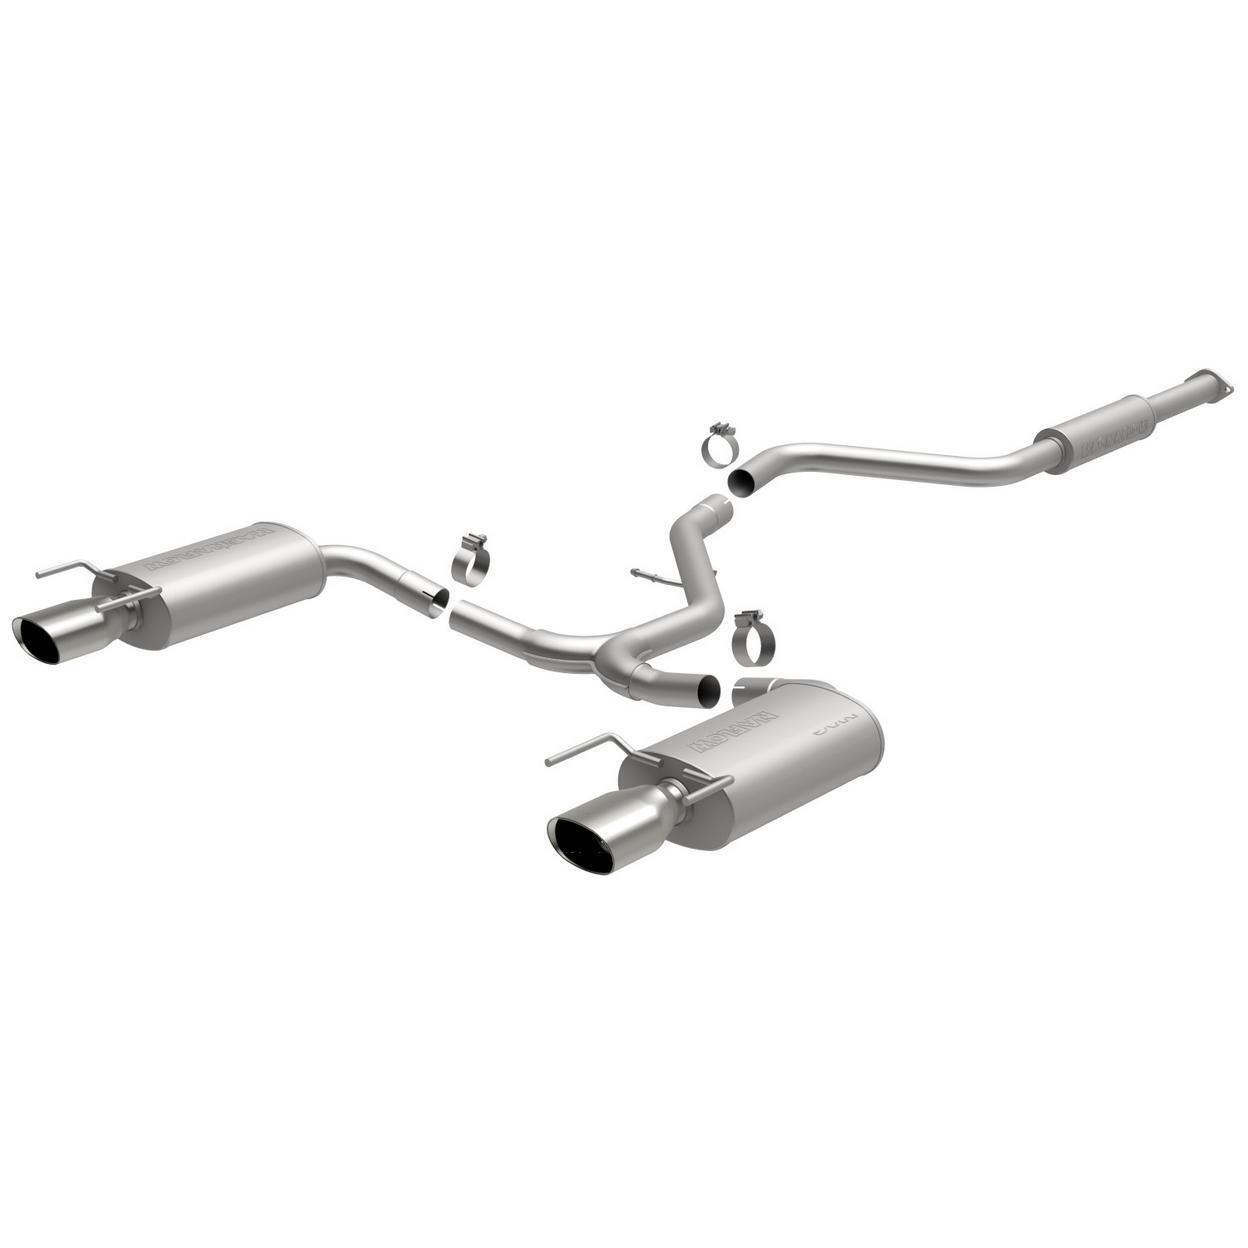 Exhaust System Kit for 2016-2017 Buick Regal Sport Touring Turbo 2.0L L4 GAS DOH